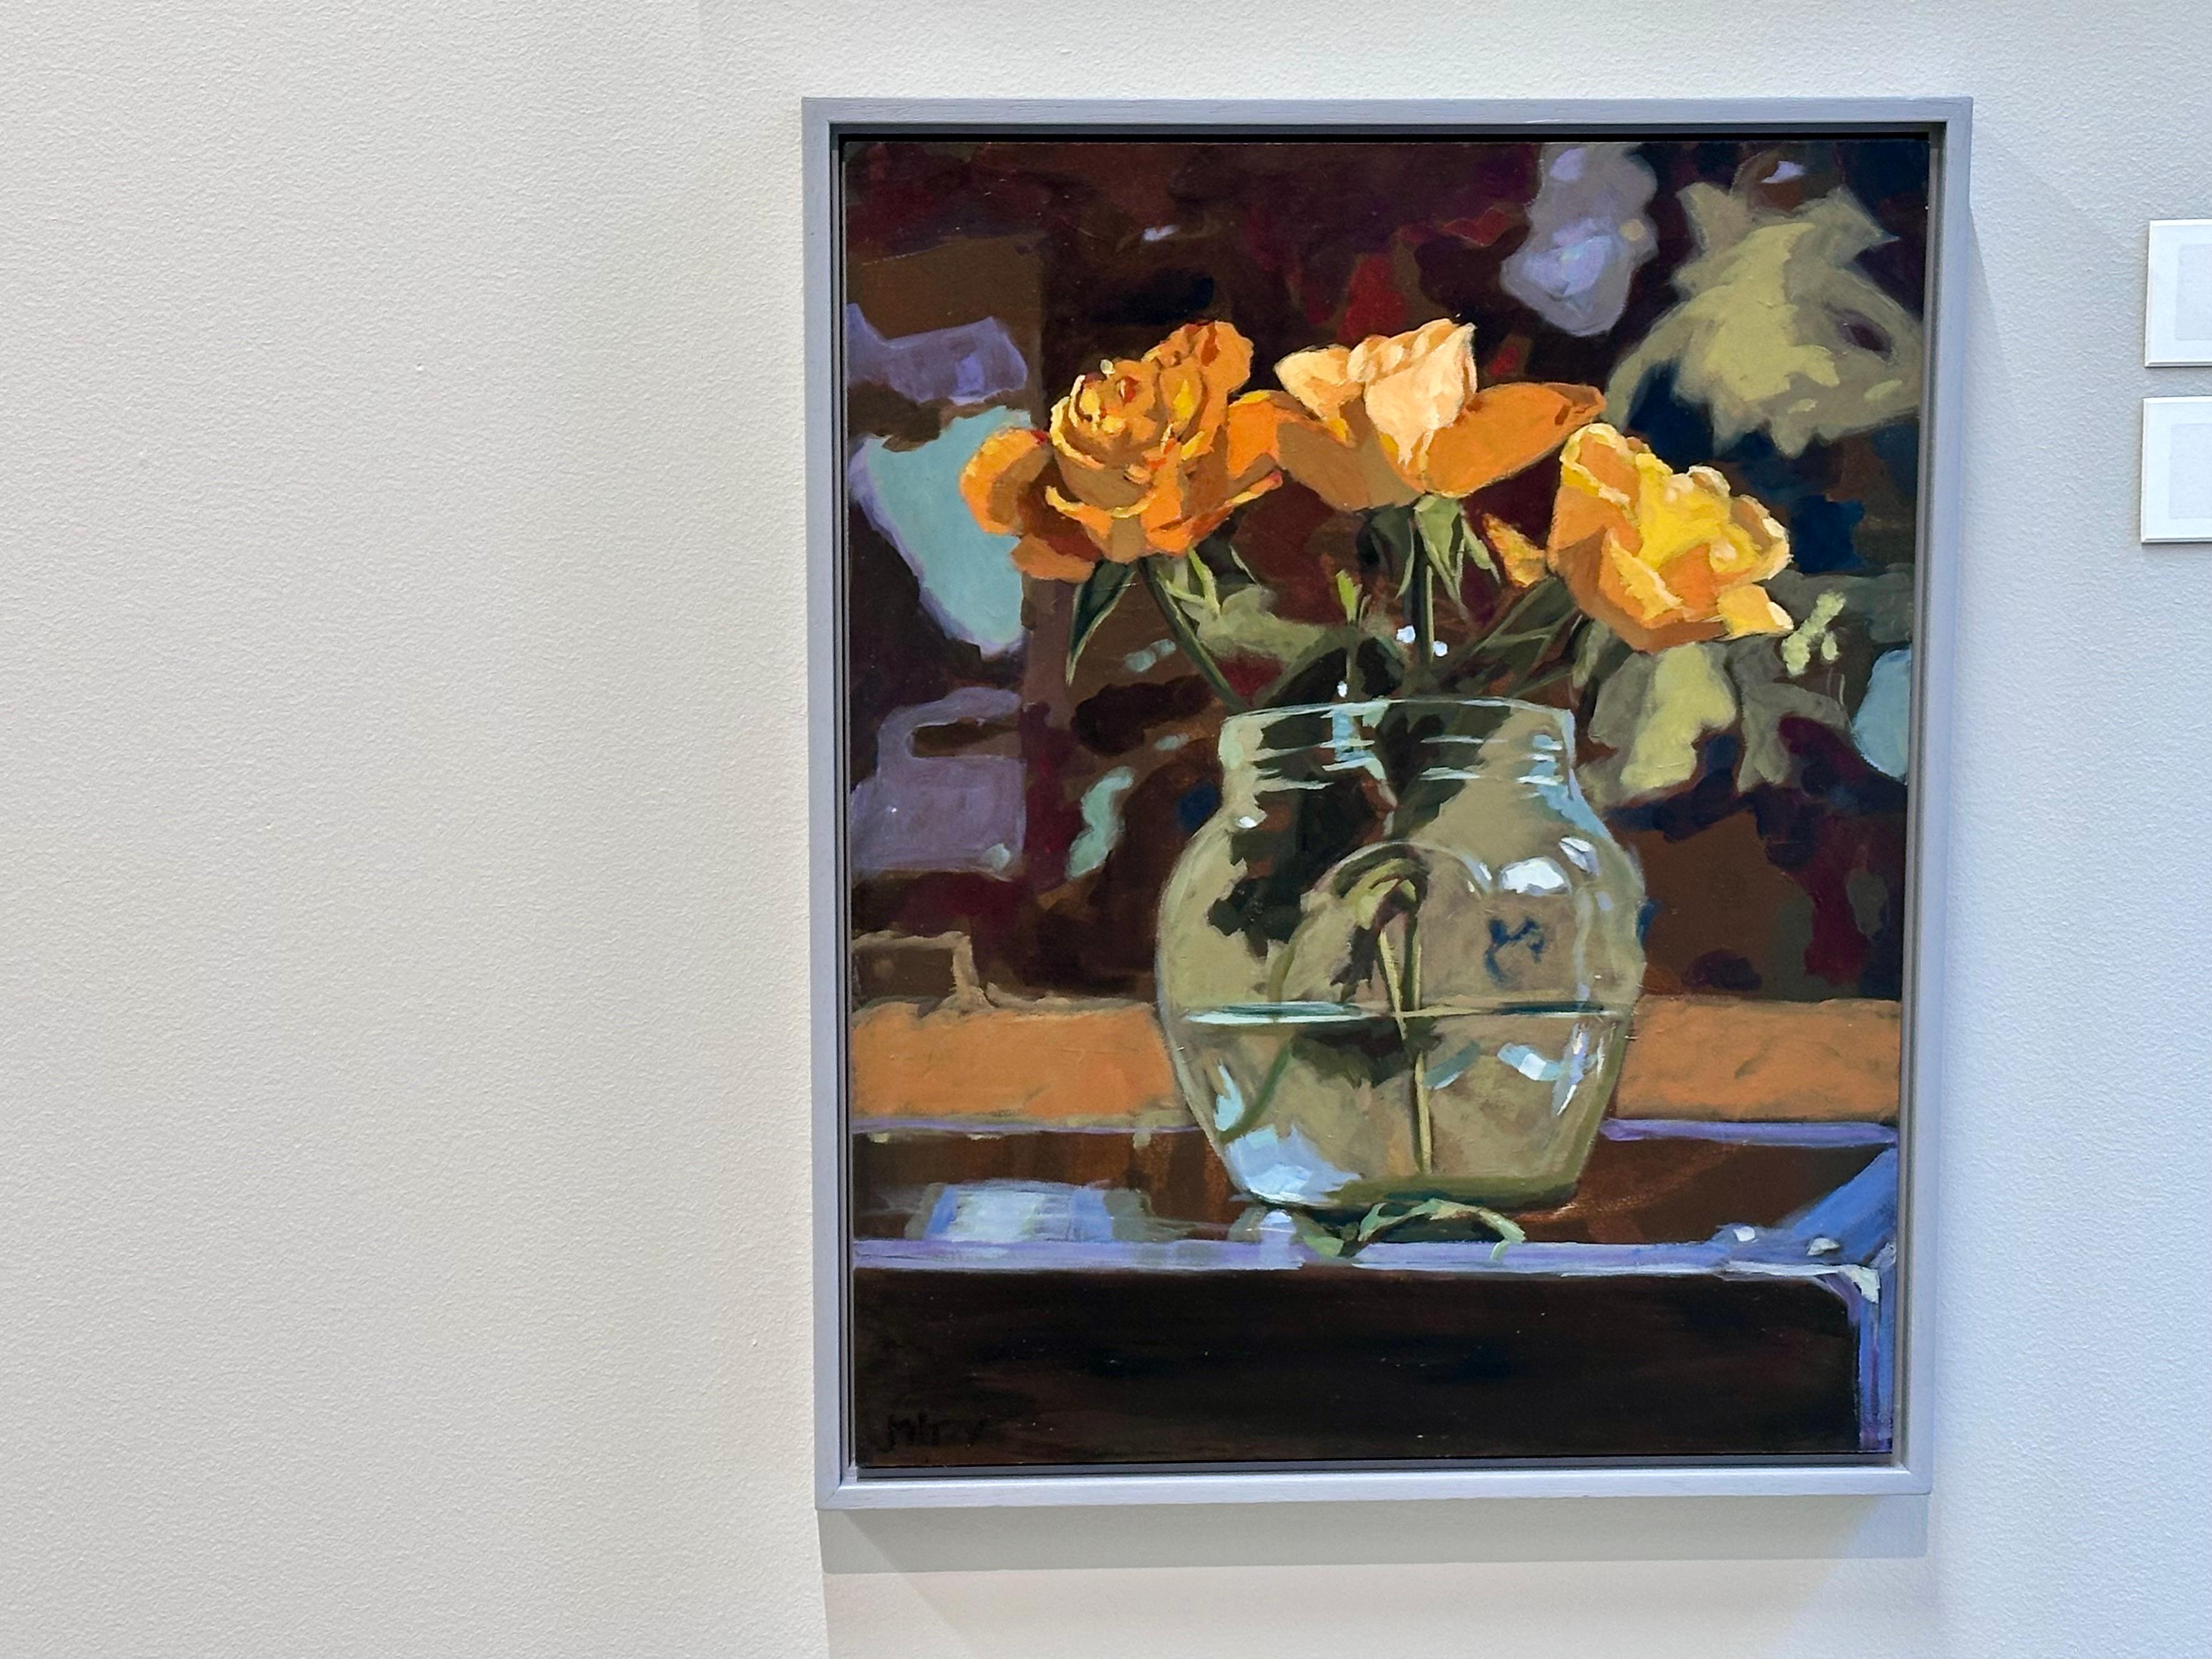 Orange Roses- 21st Century flower painting with yellow roses - Contemporary Painting by Mitzy Renooy